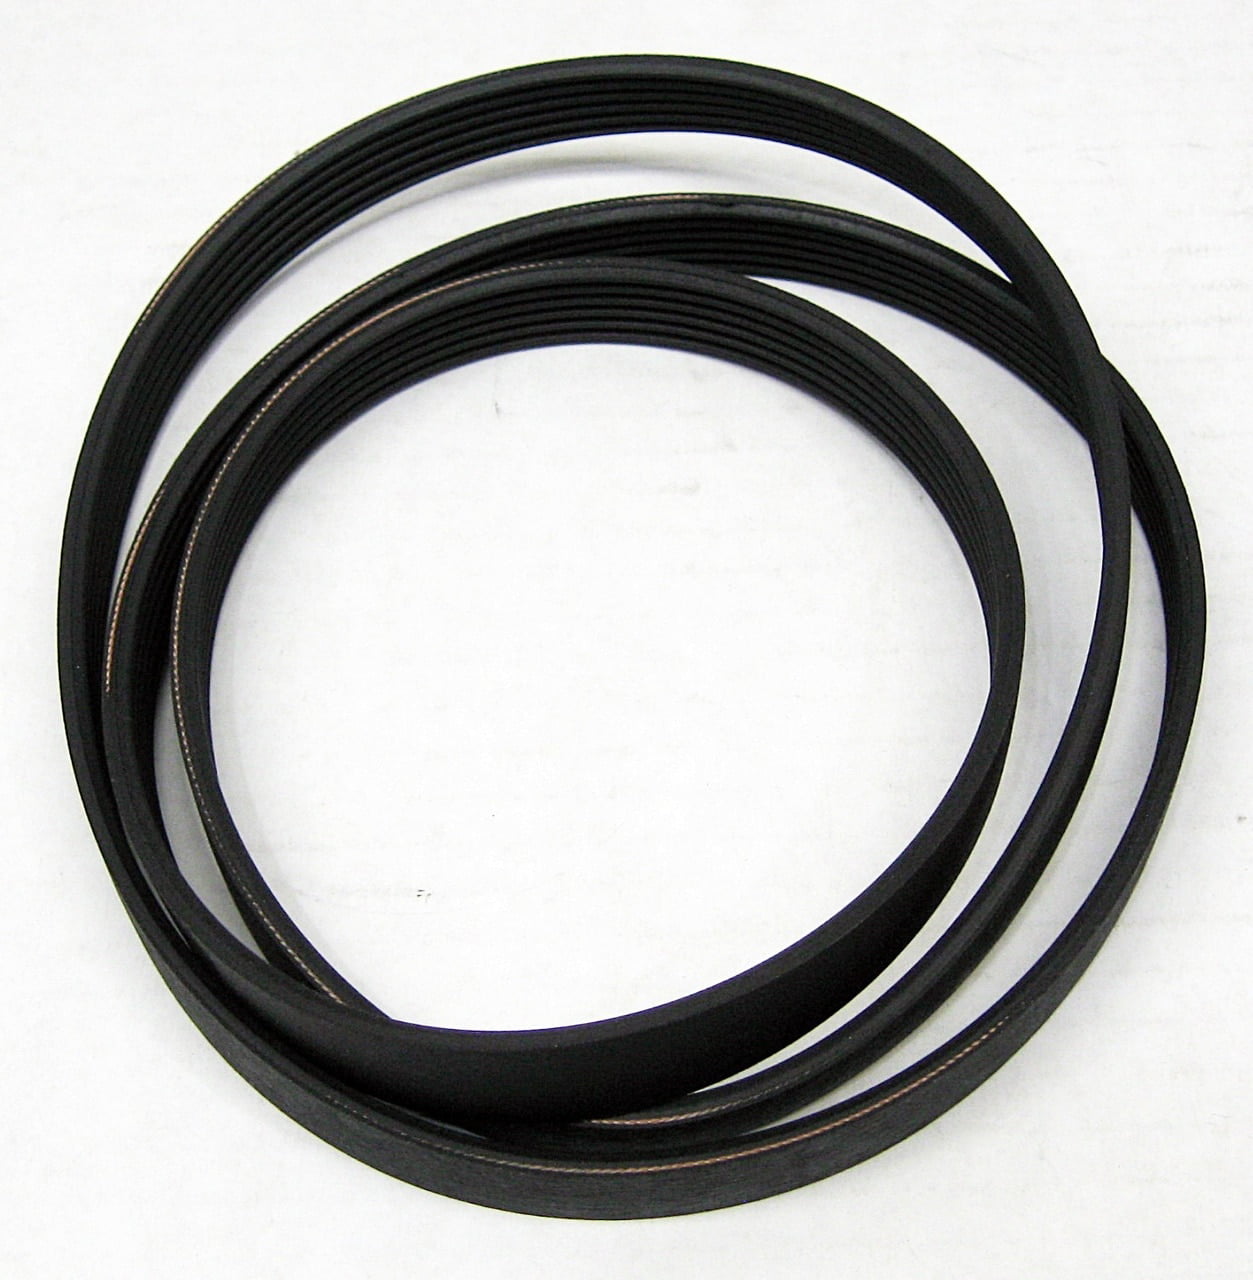 PS11746258 Drive Belt Compatible With Whirlpool Washer Washing Machines 